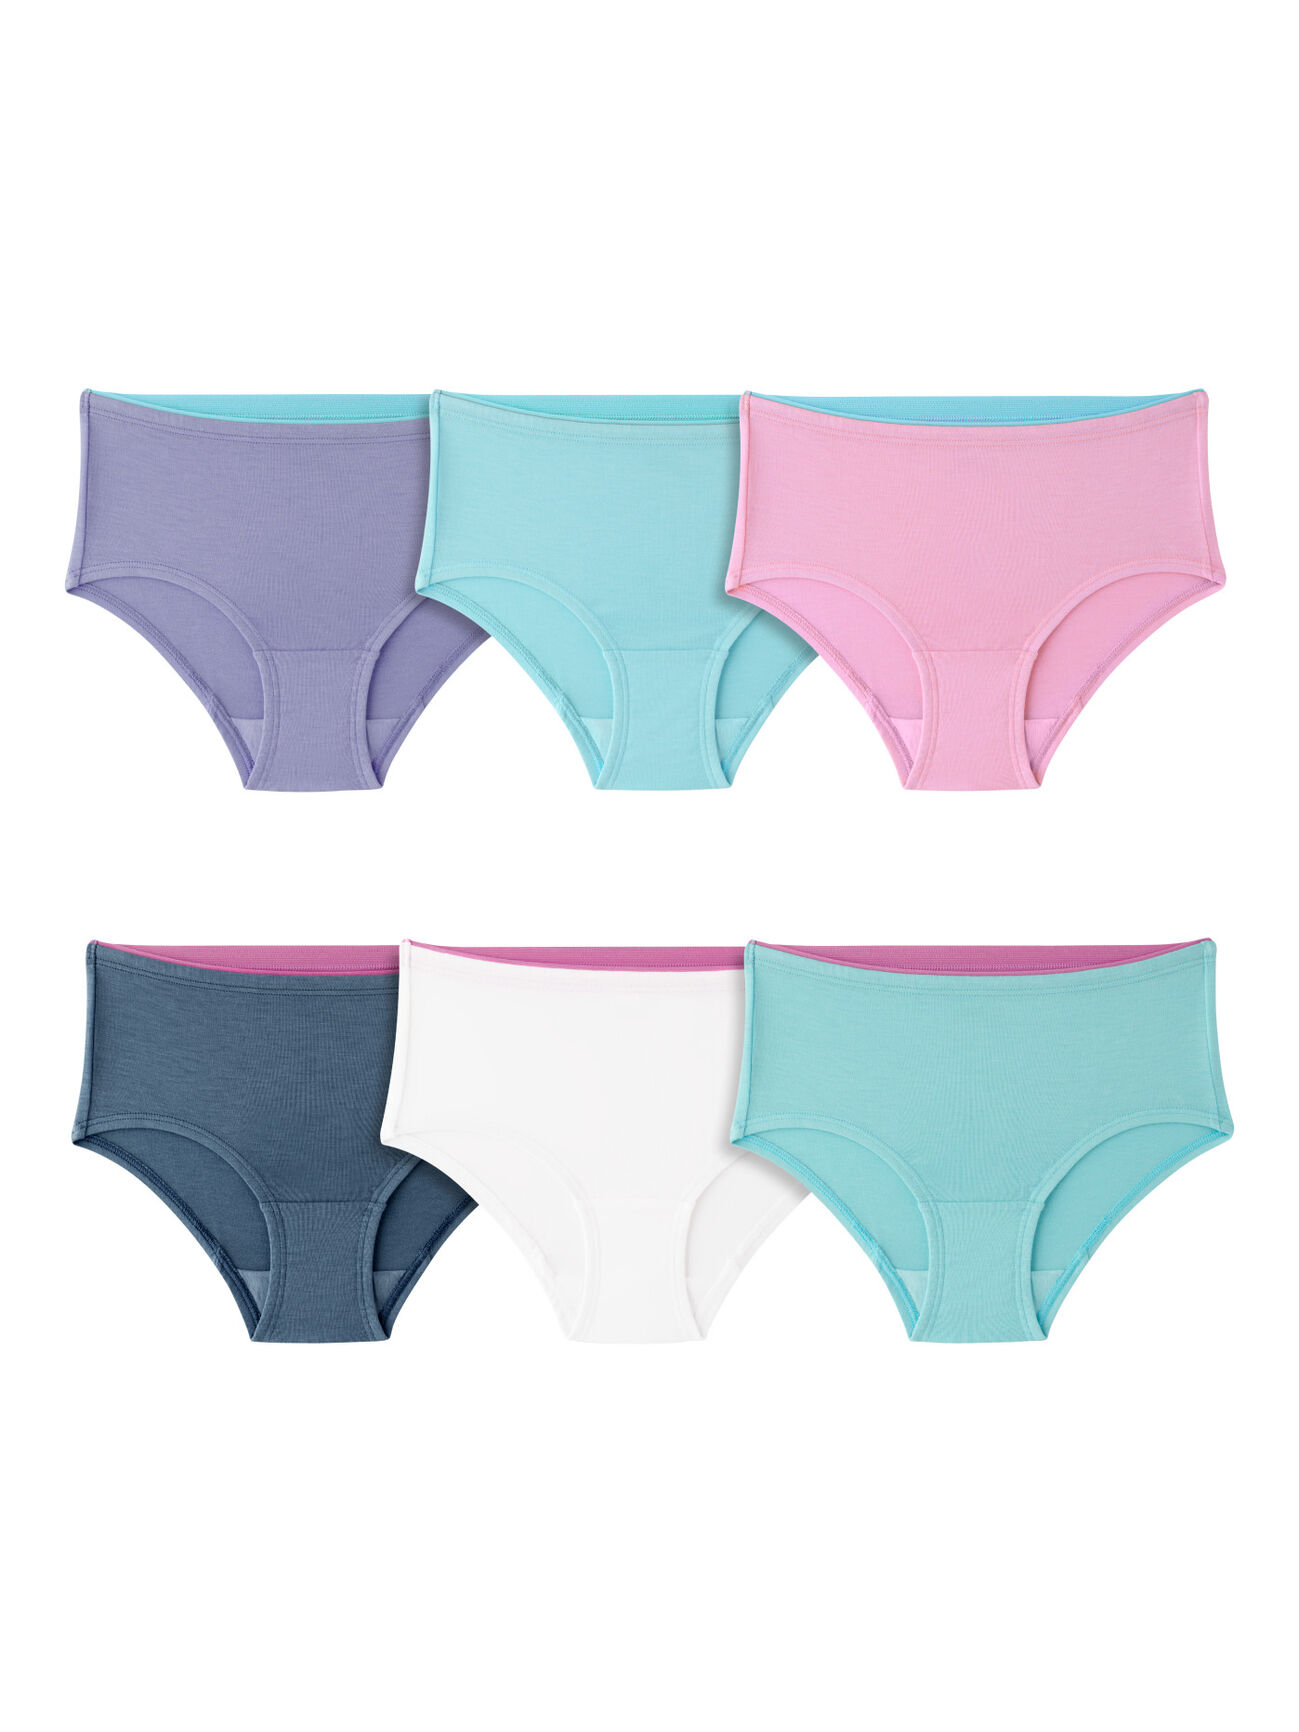 Teen Girls Cotton Underwear 4 Or 5 Pack Breathable Lingerie